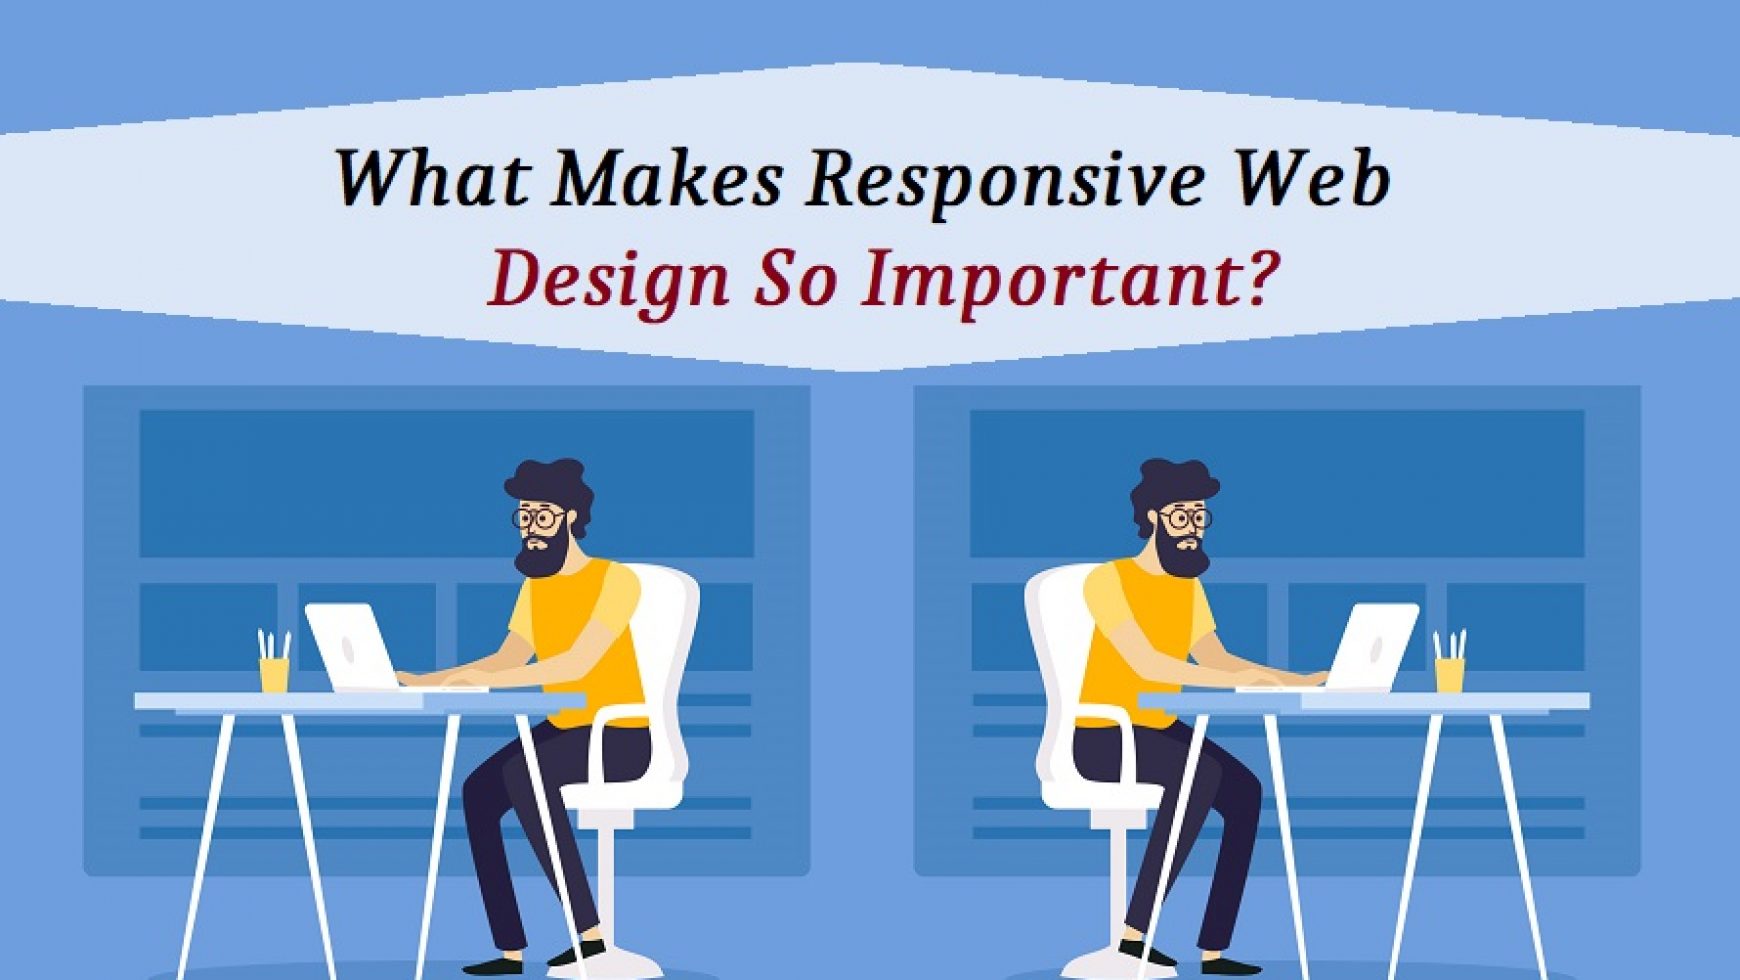 What Makes Responsive Web Design So Important?